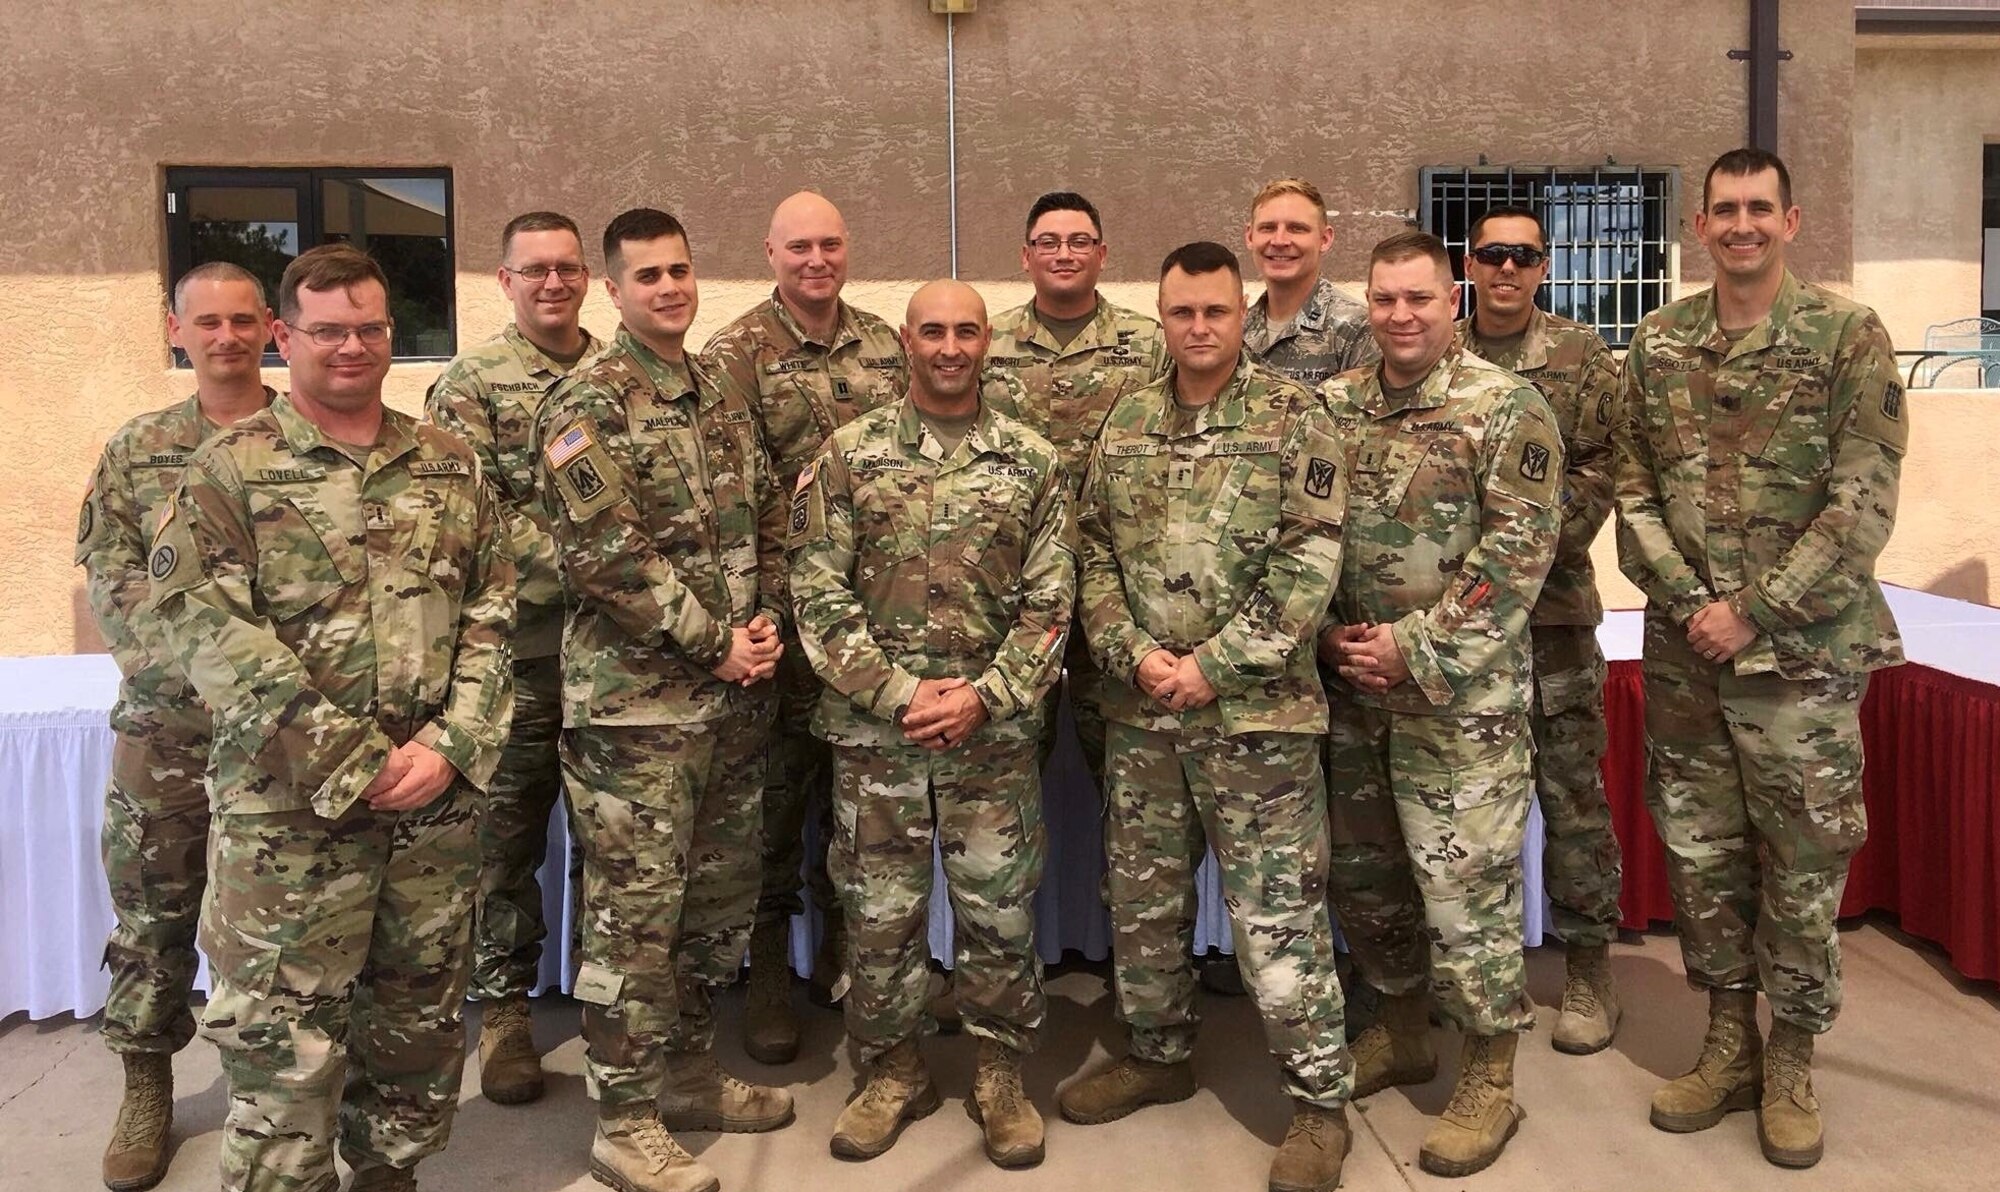 Capt. Jason Allenton, back row third from right, assigned to the 225th Air Defense Squadron, graduates with 11 Army officers from Air Defense Artillery Fire Control Officers (ADAFCO), Kirkland Air Force Base, New Mexico, July 27, 2018.   Experience gained at the ADAFCO course assists the Western Air Defense Sector in mission planning, execution and coordination of Army assets as part of Operation Noble Eagle. (Courtesy photo by Capt. Jason Allenton)